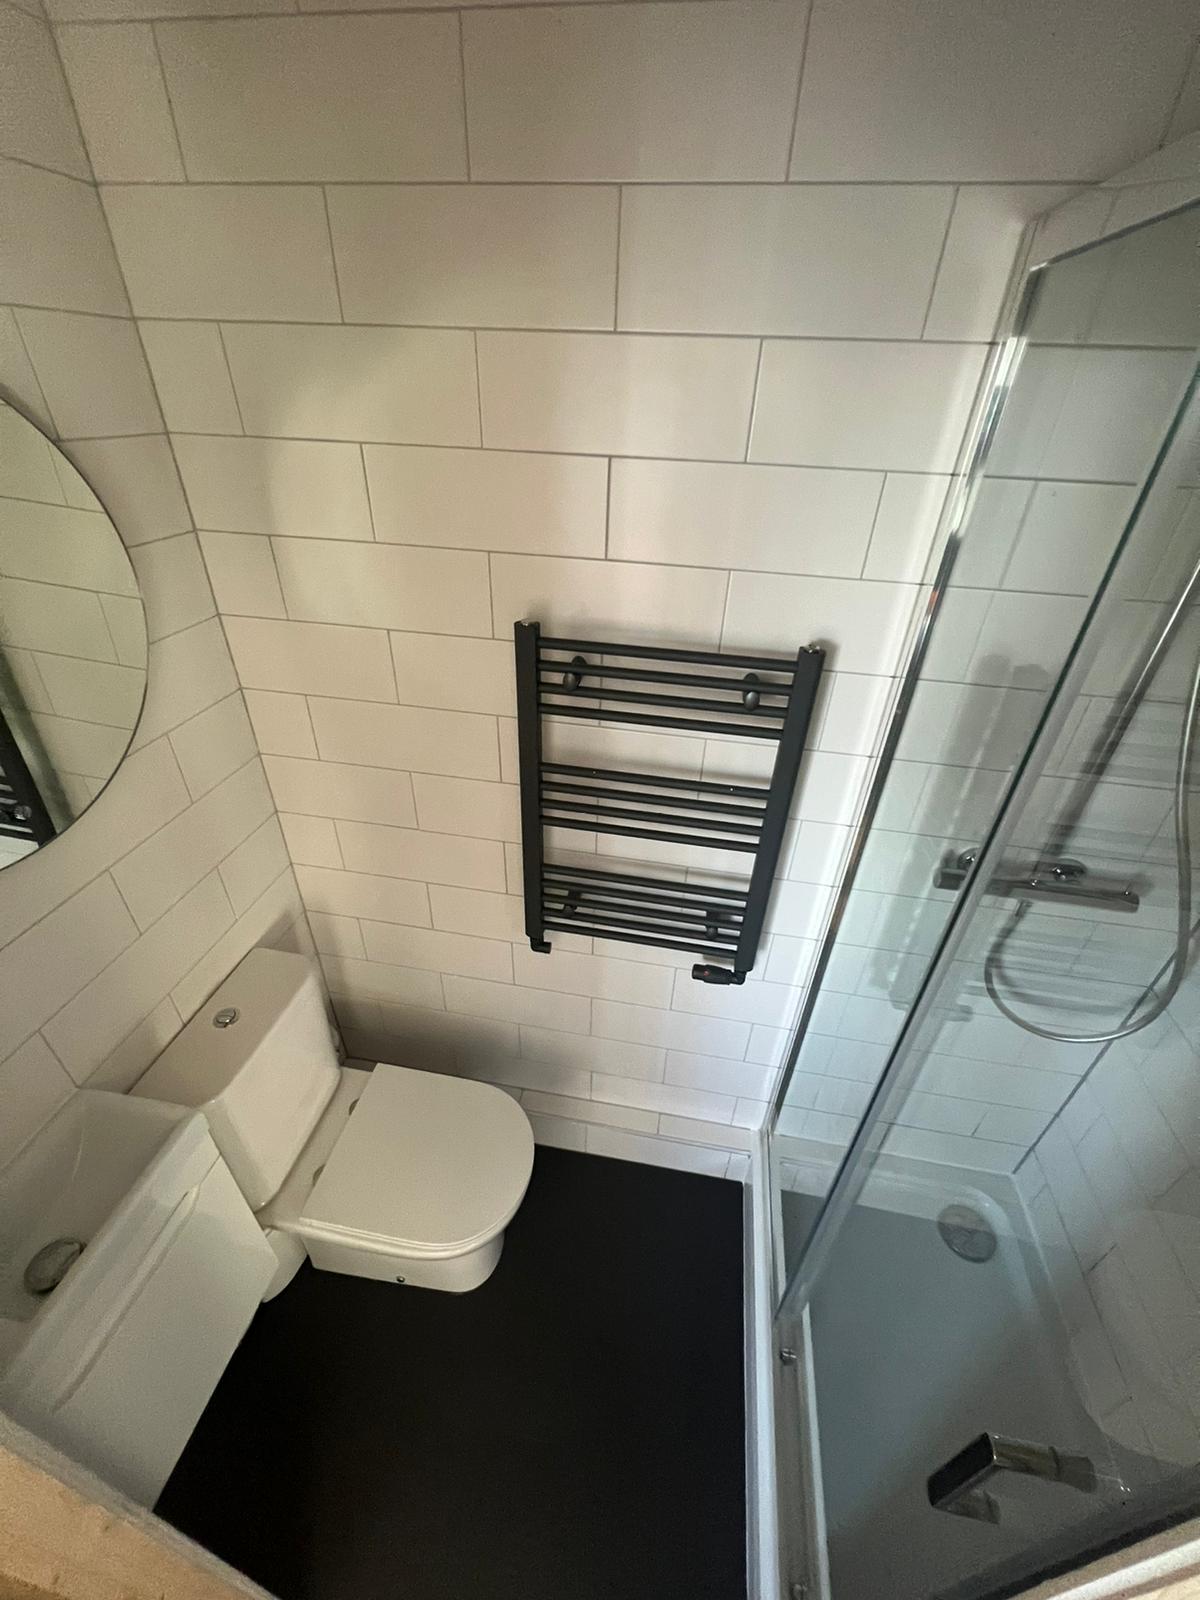 Create an ensuite view from ceiling showing decent floor space in this small room